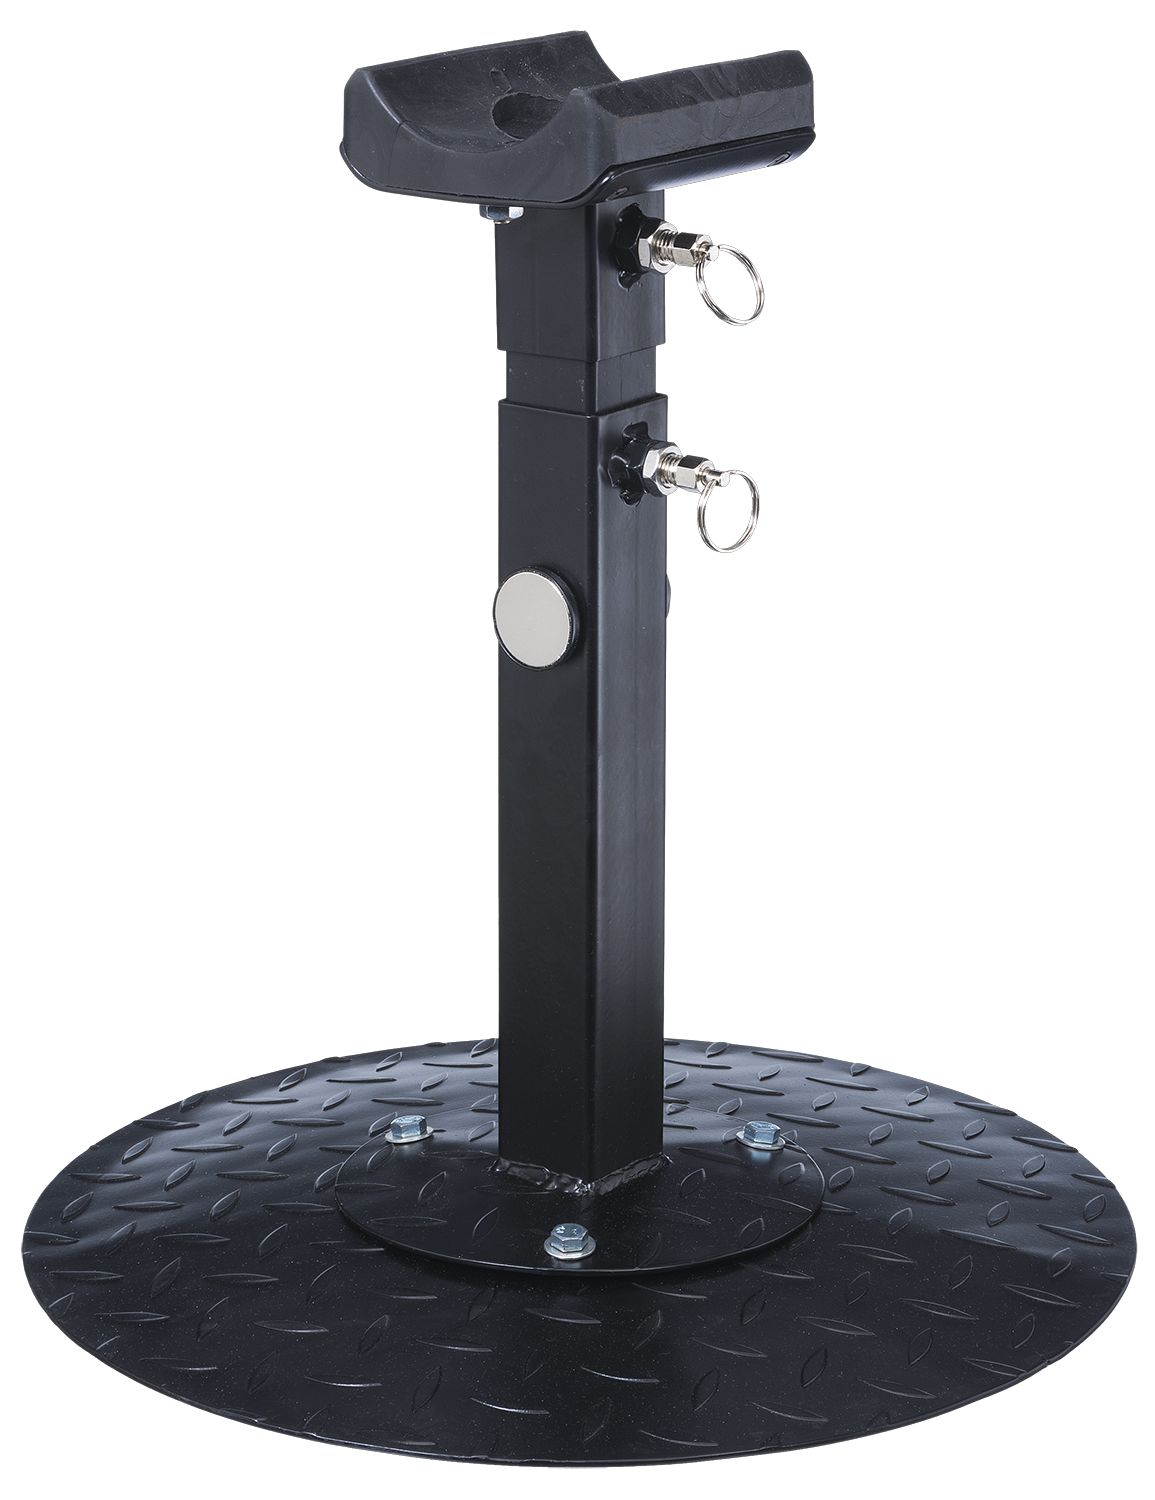 Tough-1 Professional Adjustable Farrier Stand - Breeches.com